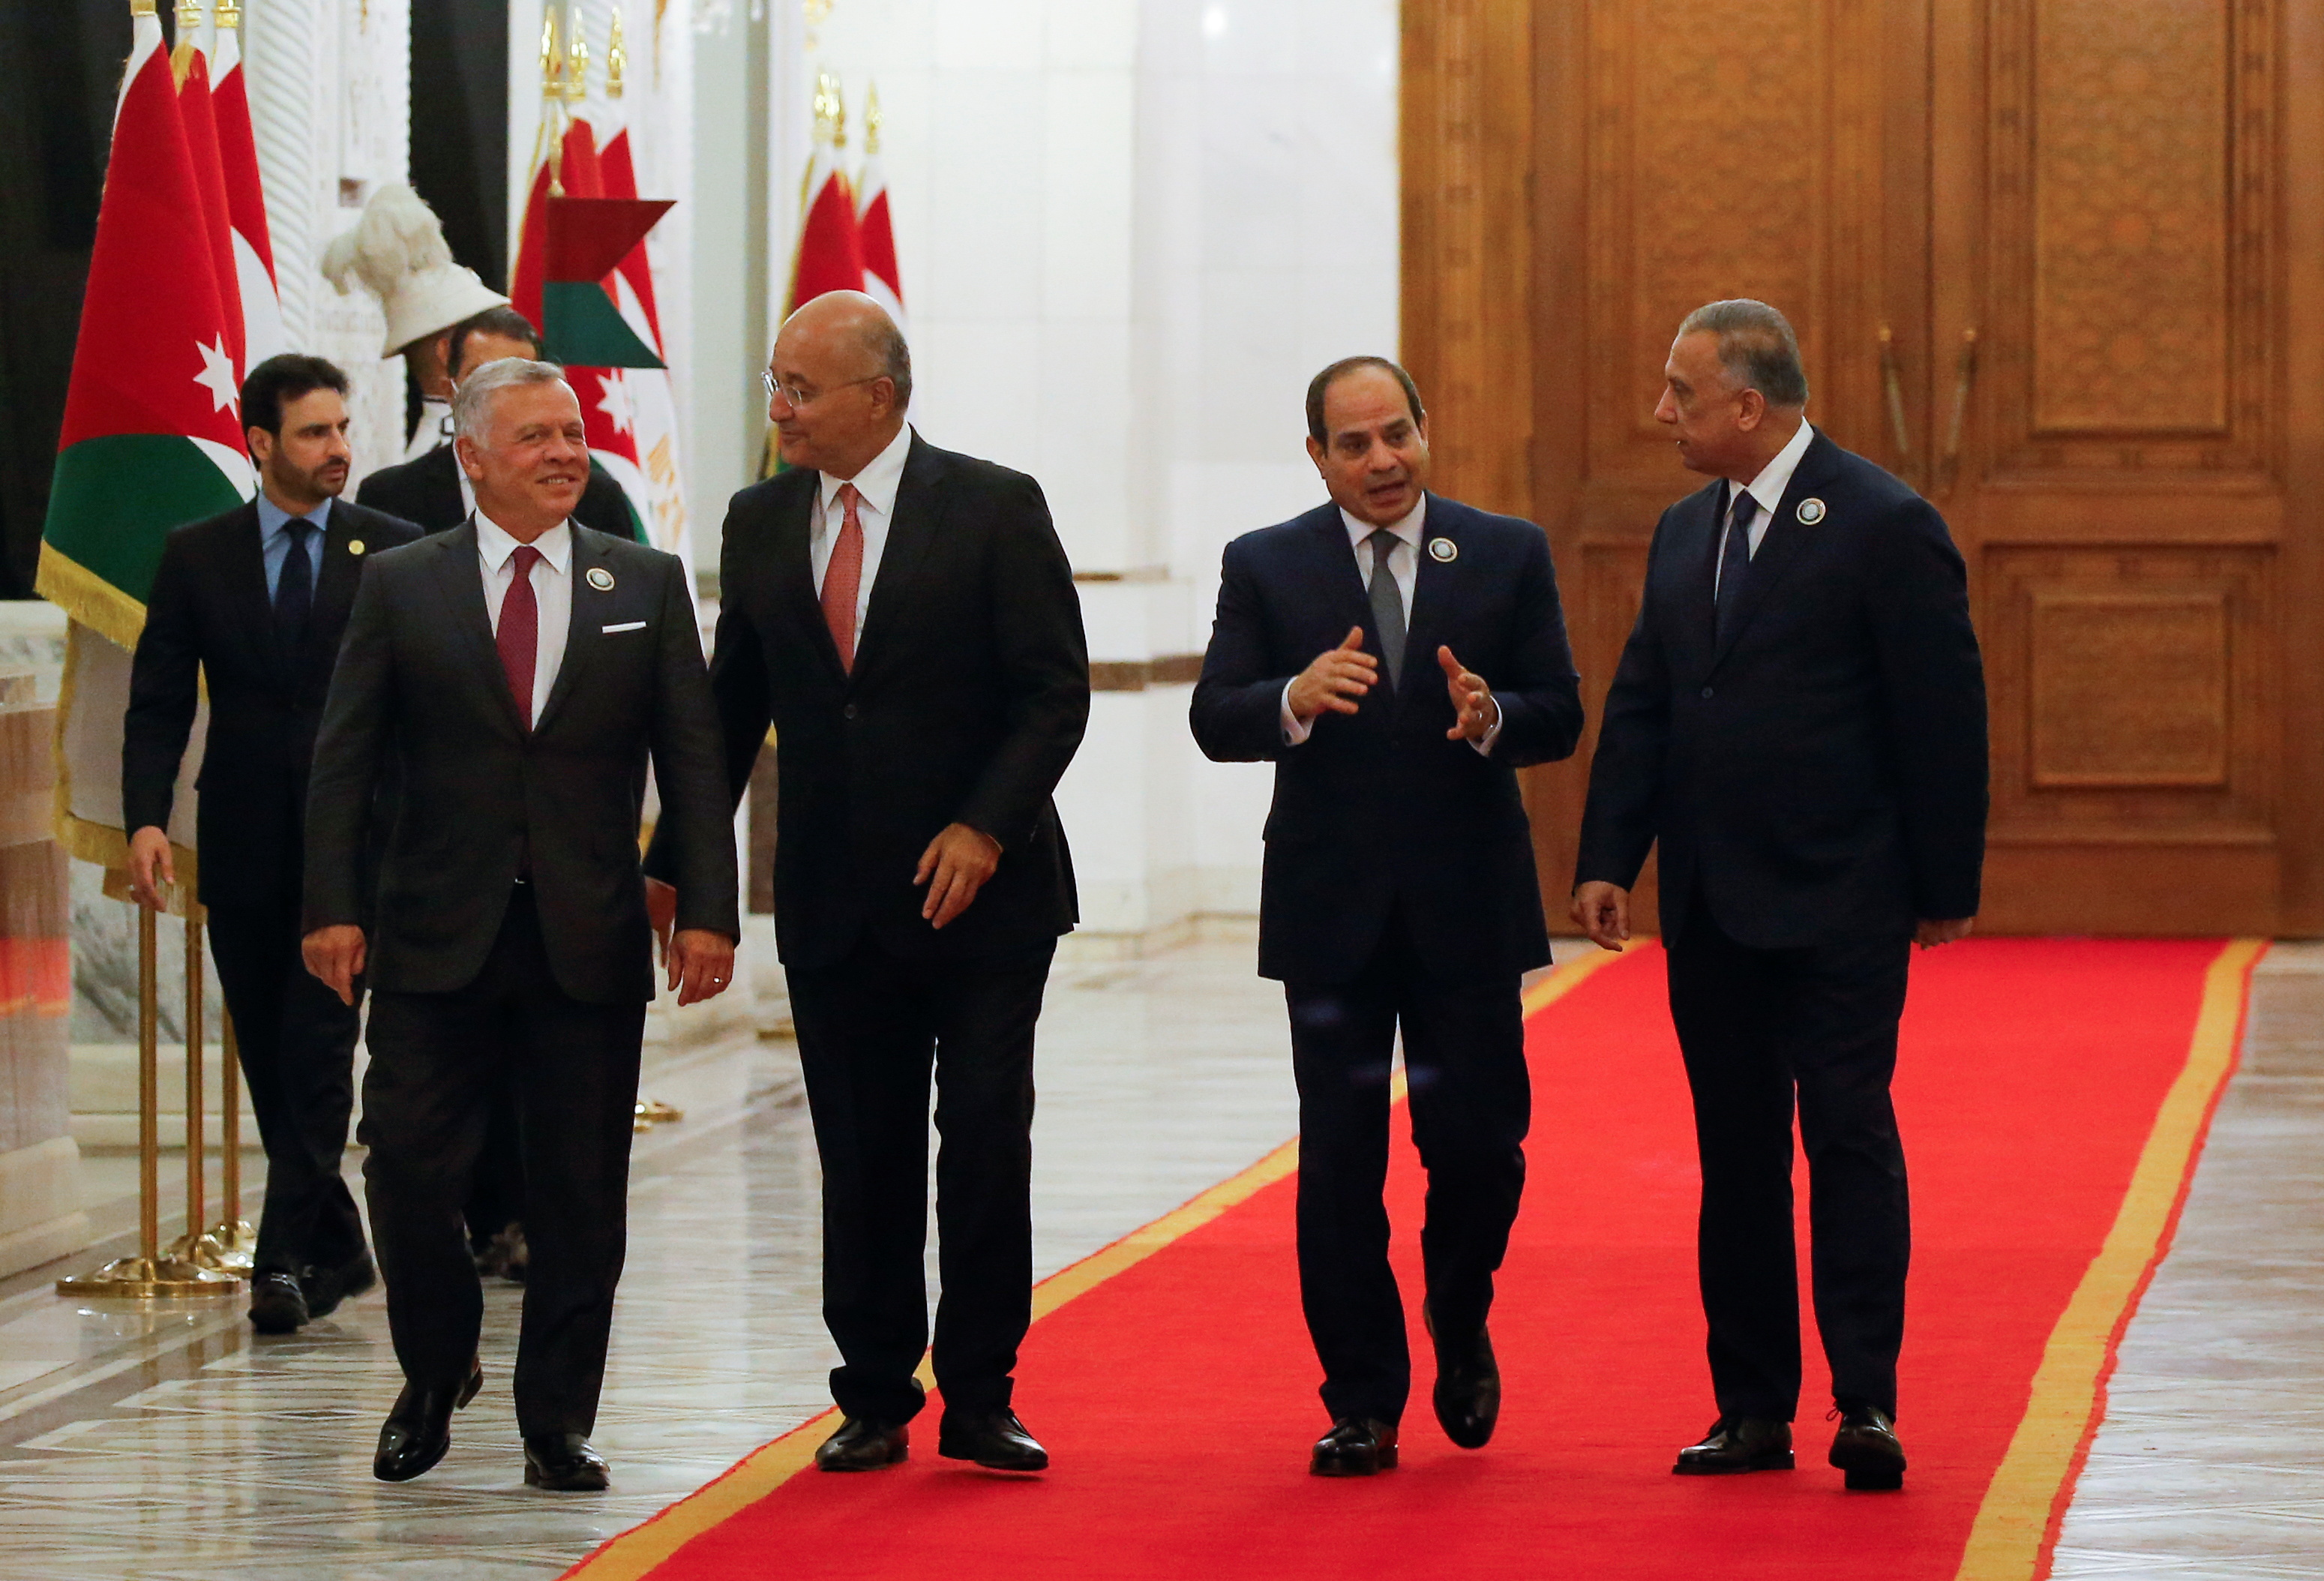 Egypt, Iraq, and Jordan: A new partnership 30 years in the making? |  Brookings